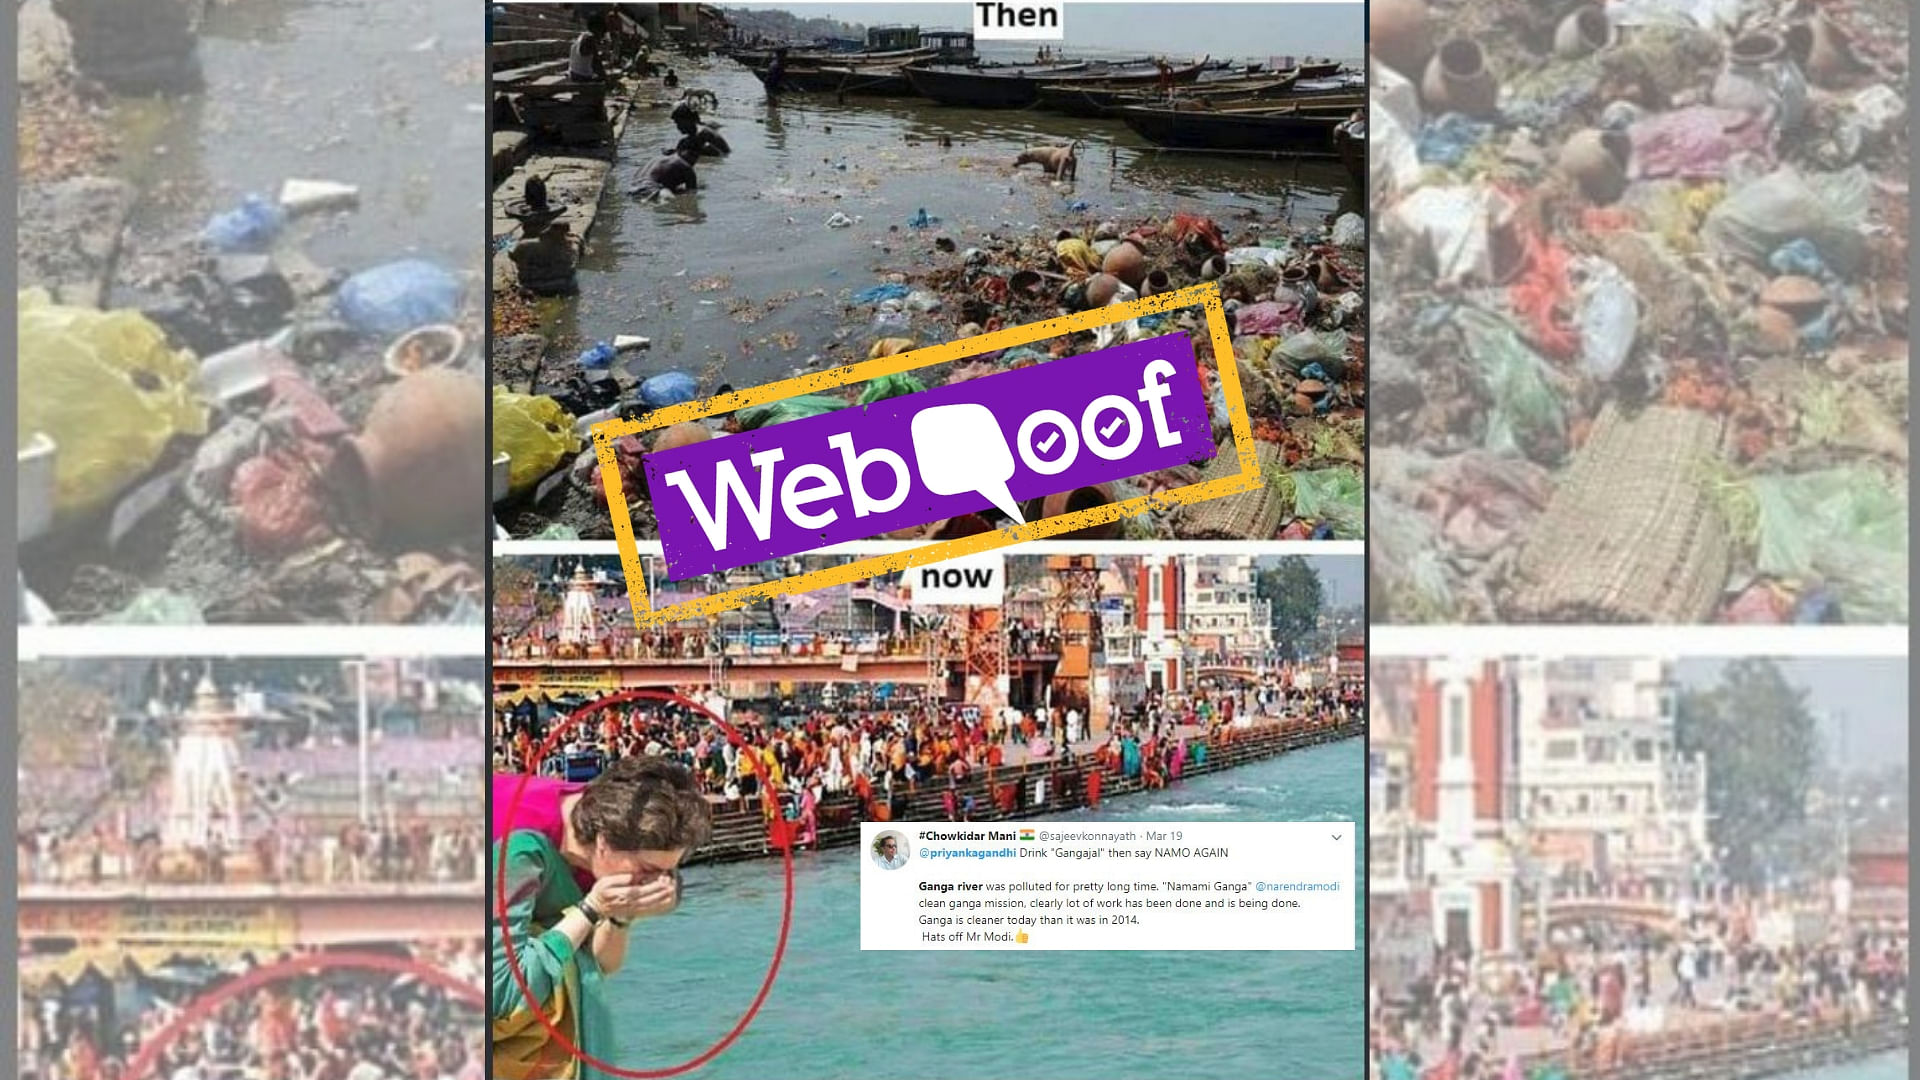 The combined photo is being shared with the narrative that the BJP government has managed to clean the Ganga, while the Congress could not.